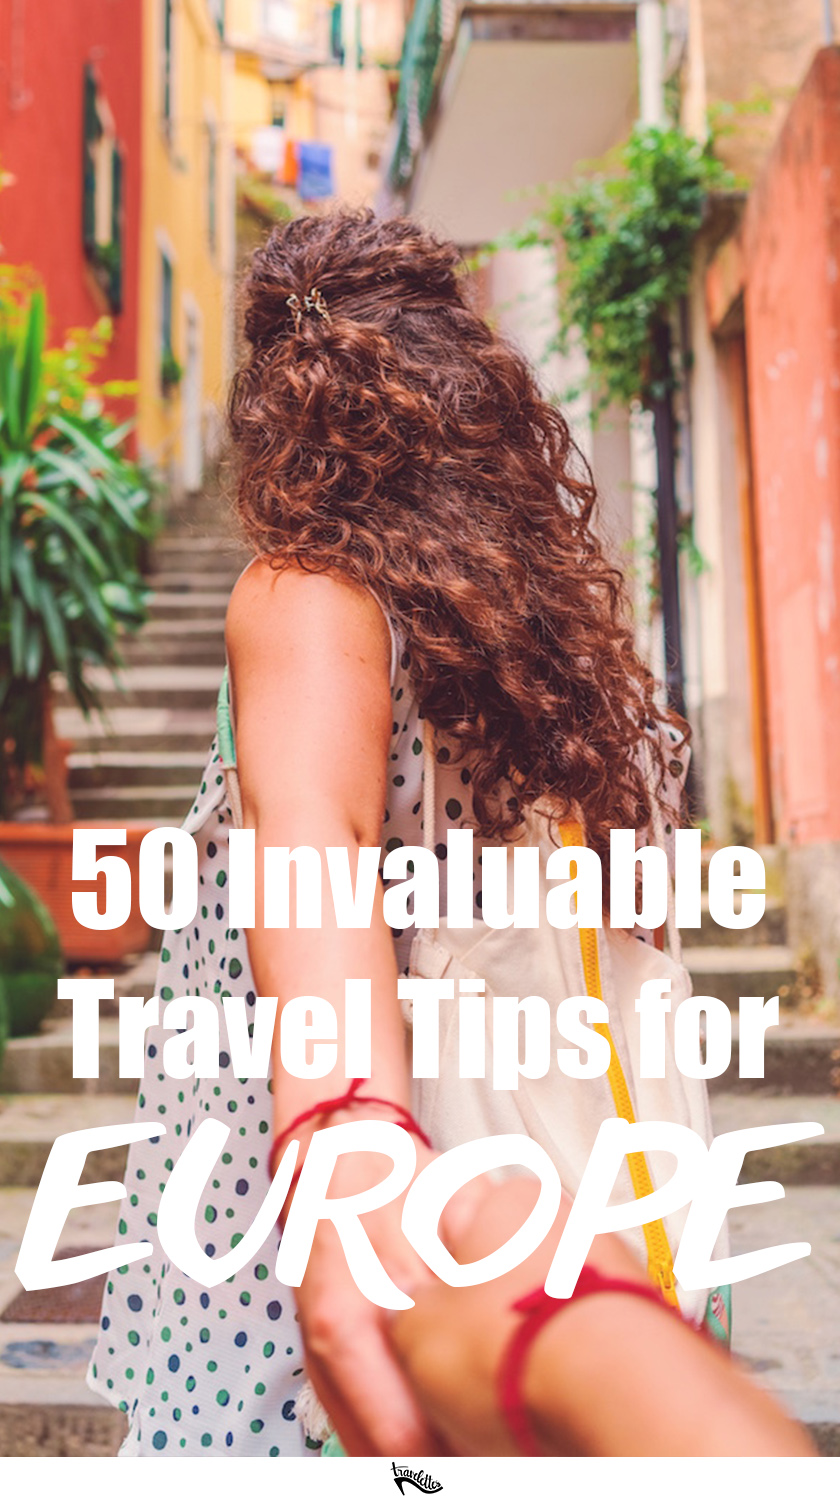 50 Invaluable Travel Tips for Europe